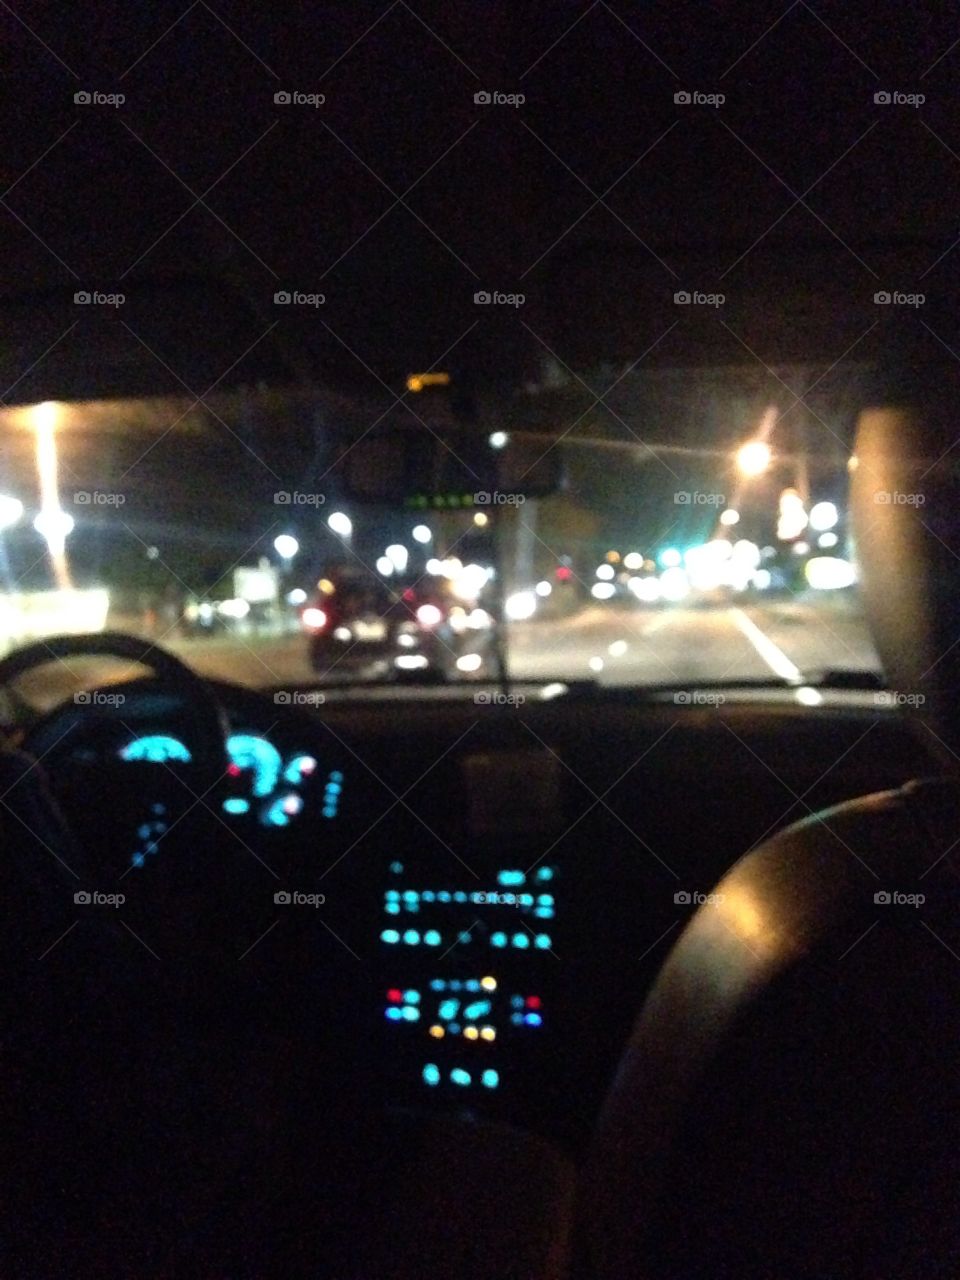 Late night driving